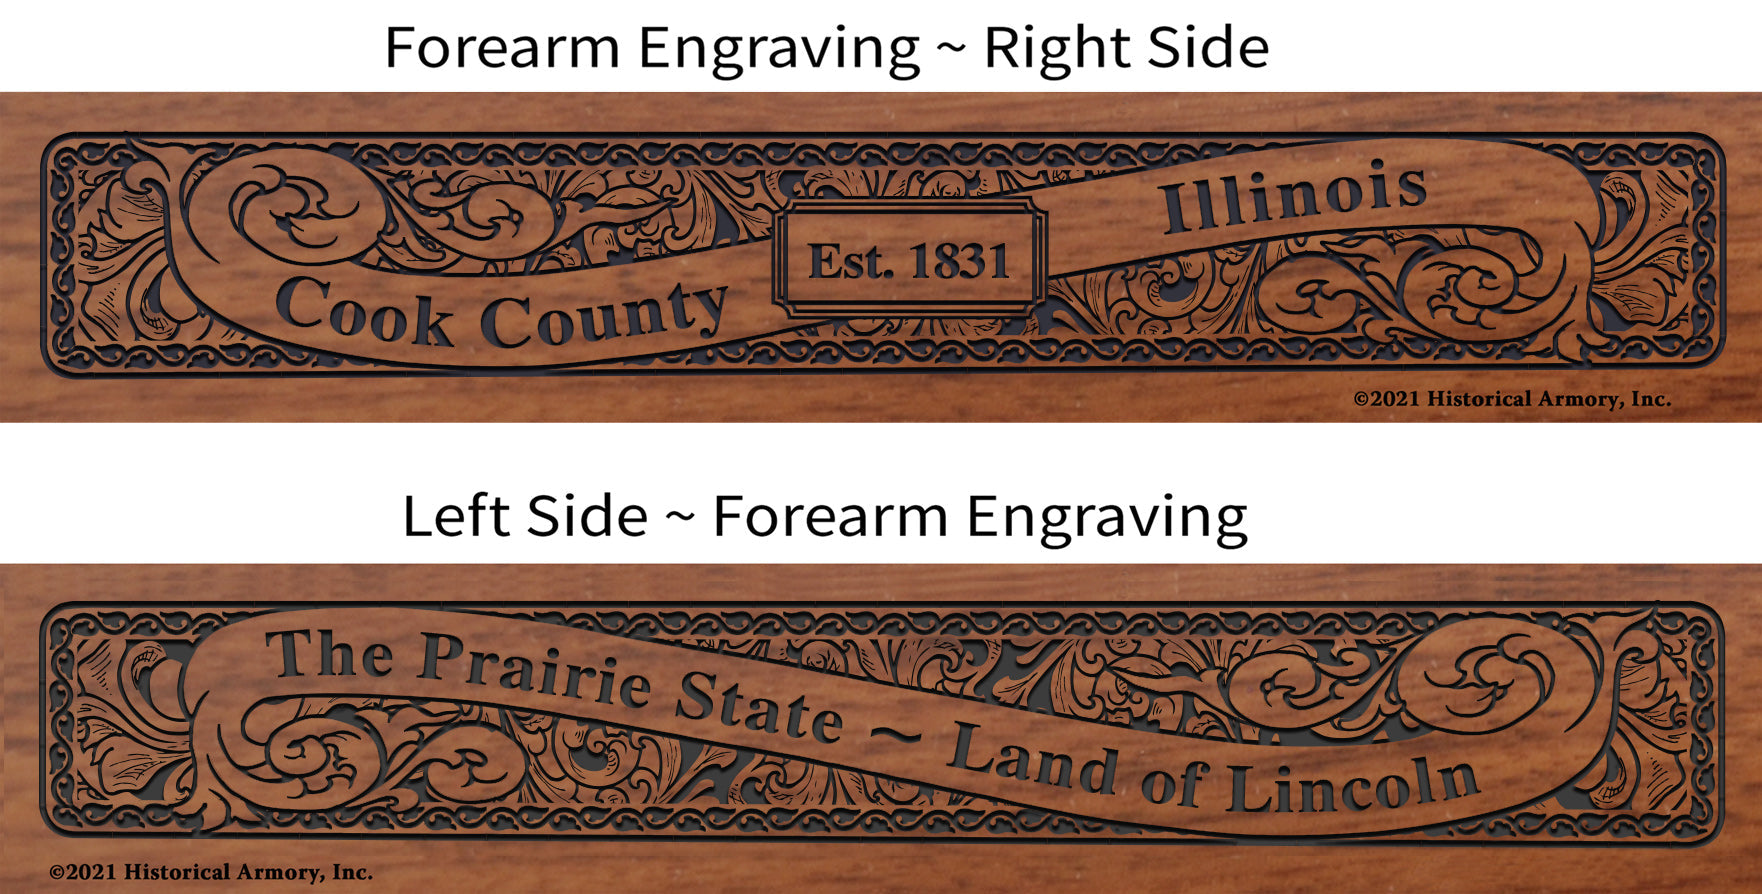 Cook County Illinois Establishment and Motto History Engraved Rifle Forearm